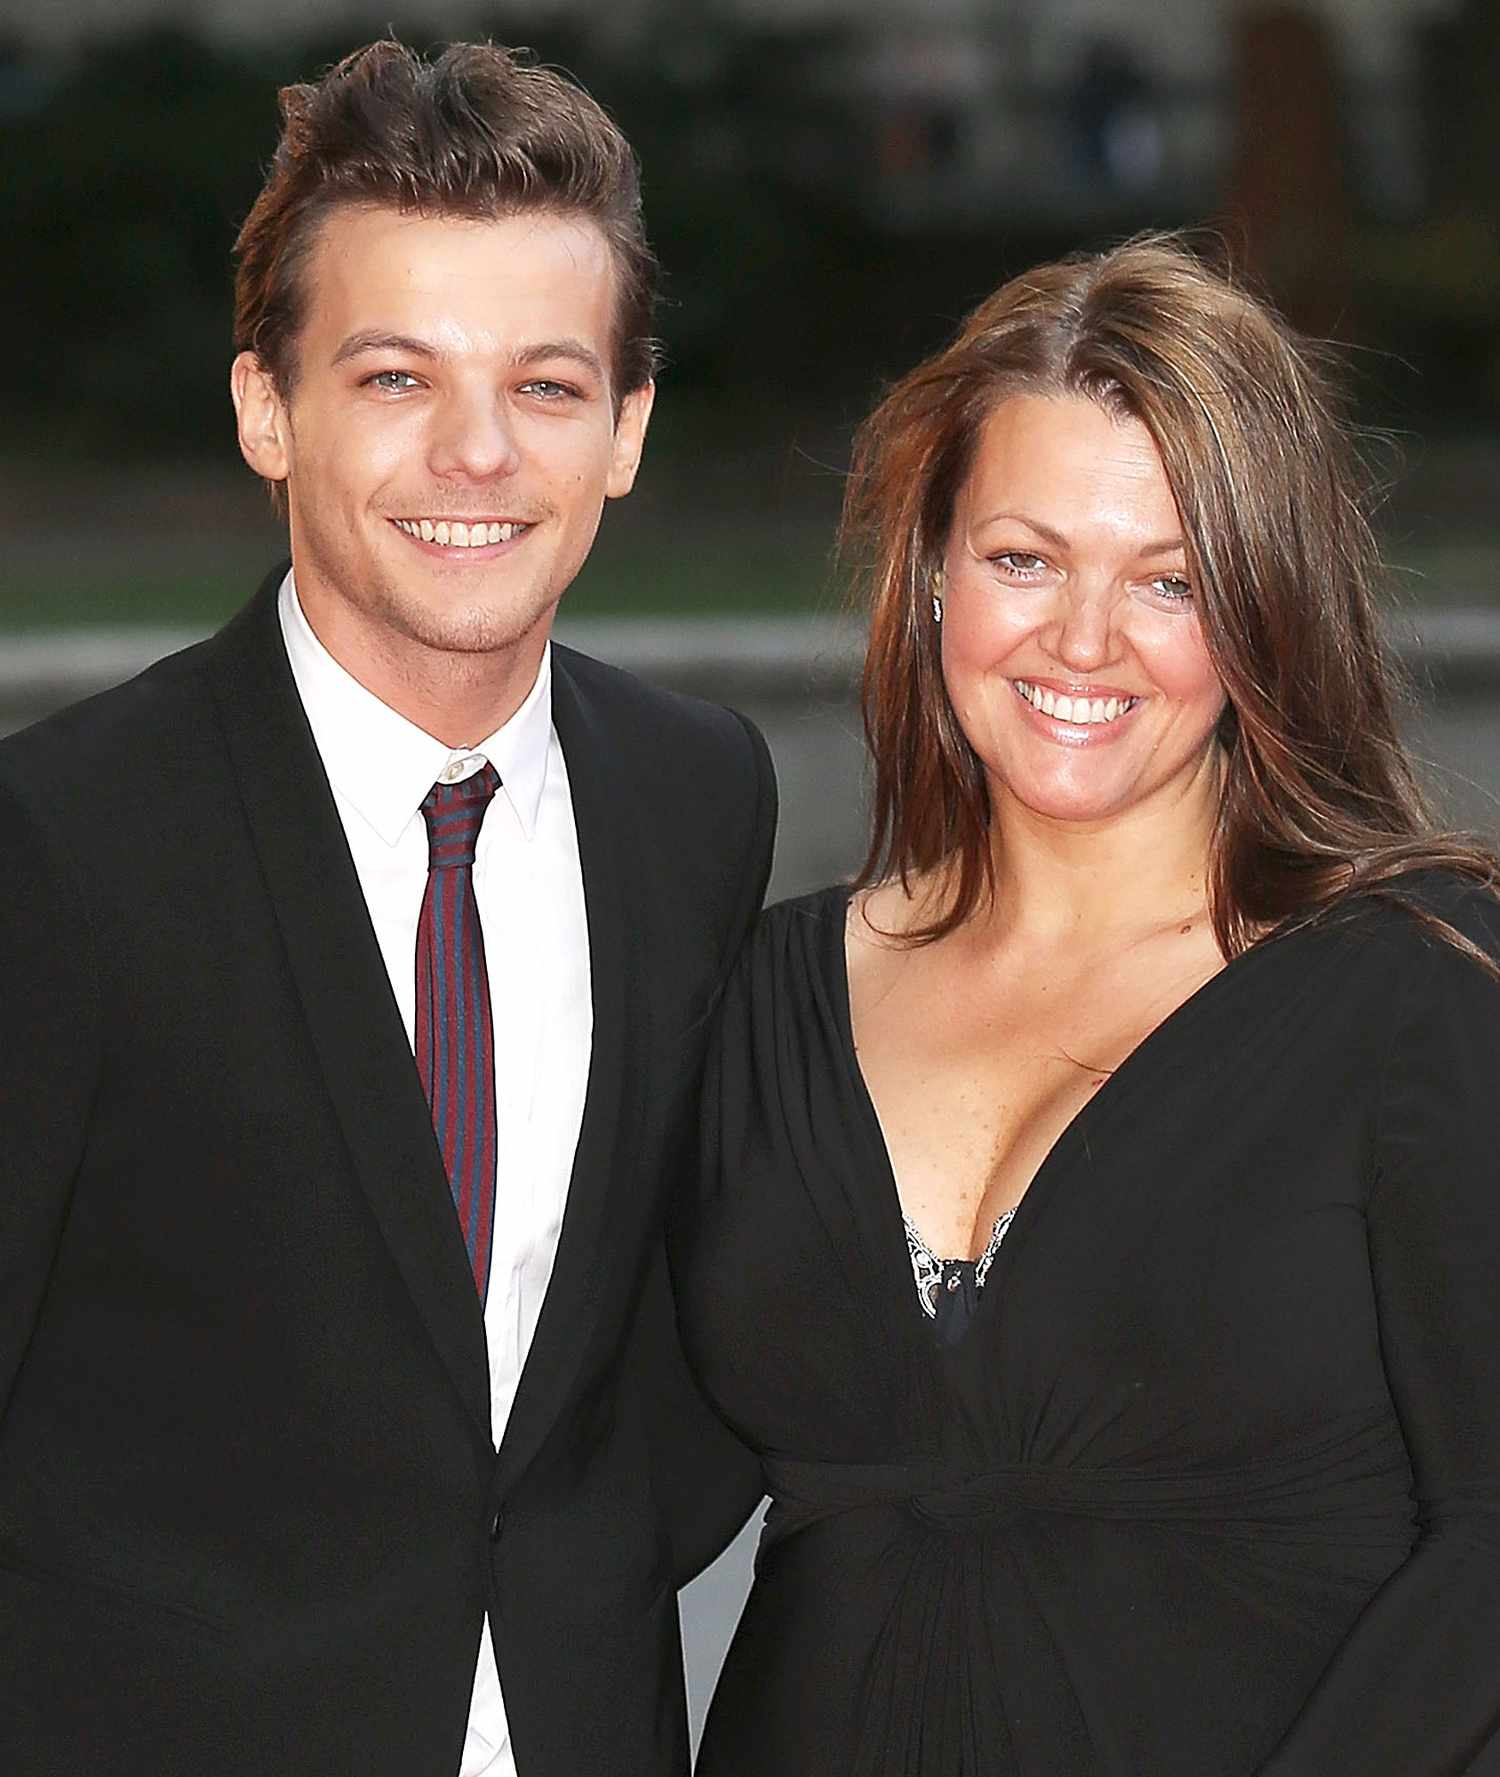 Louis Tomlinson and his mother Johannah Poulston